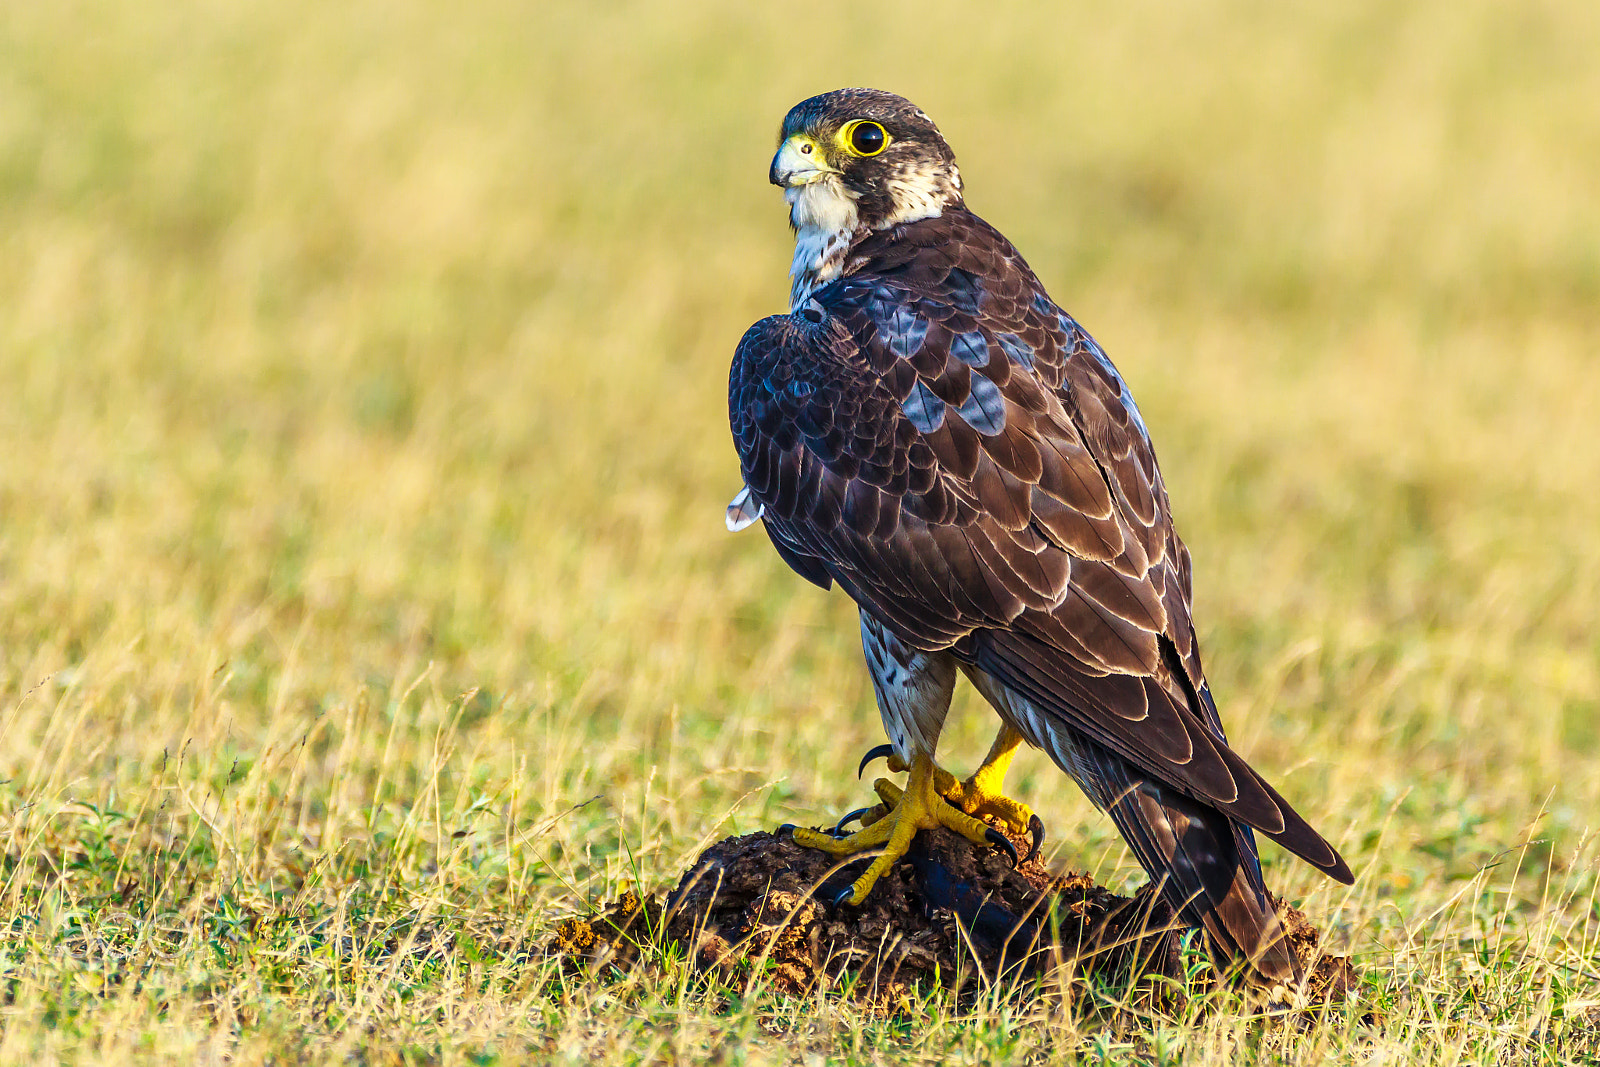 Canon EOS 60D + Sigma 150-600mm F5-6.3 DG OS HSM | C sample photo. "highly admired falconry bird" photography